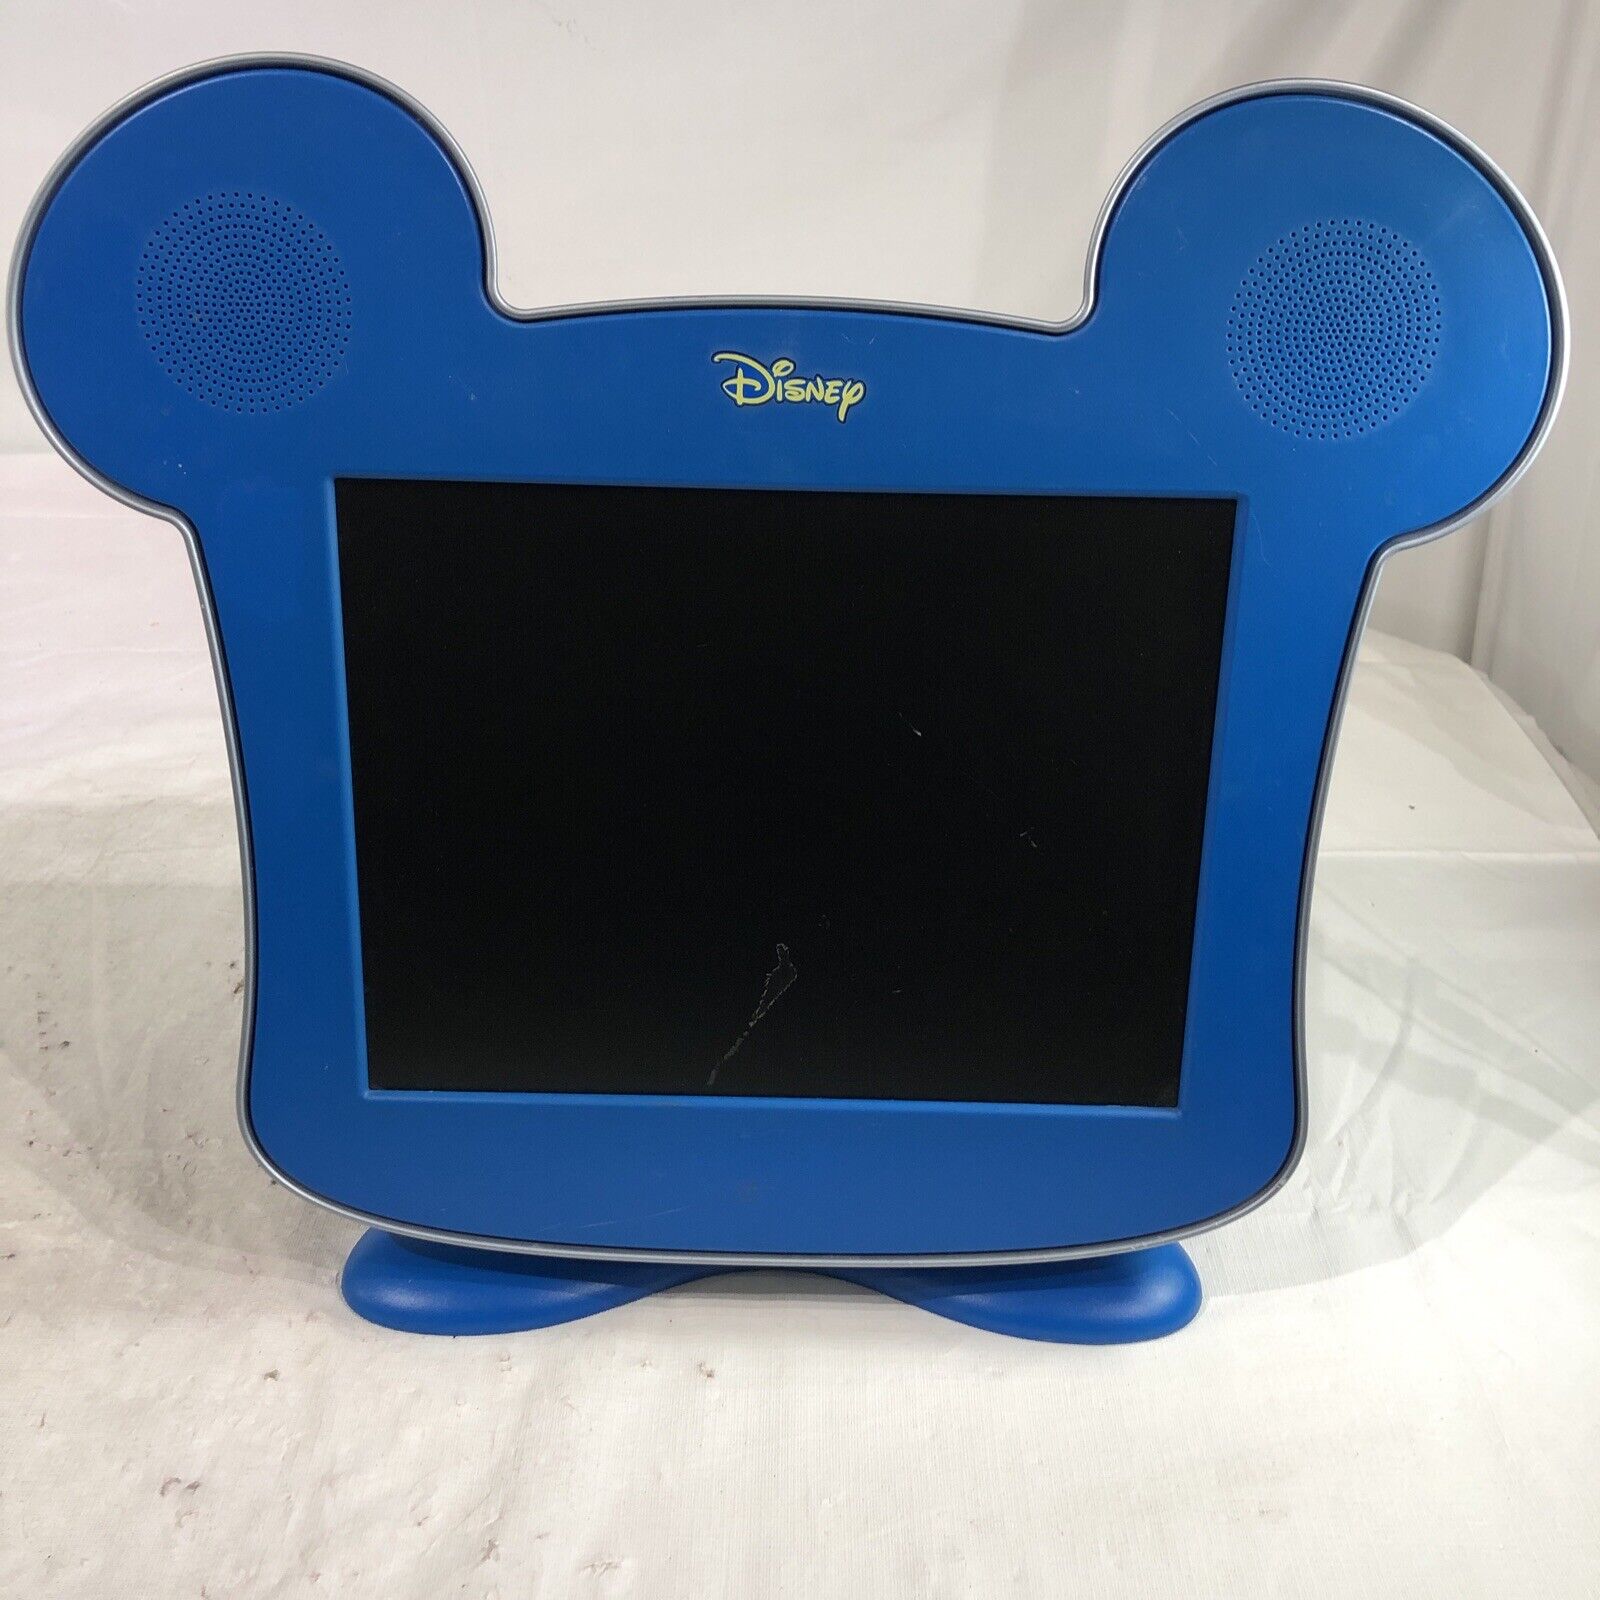 Rare Blue Disney Mickey Mouse Monitor. Tested and Working